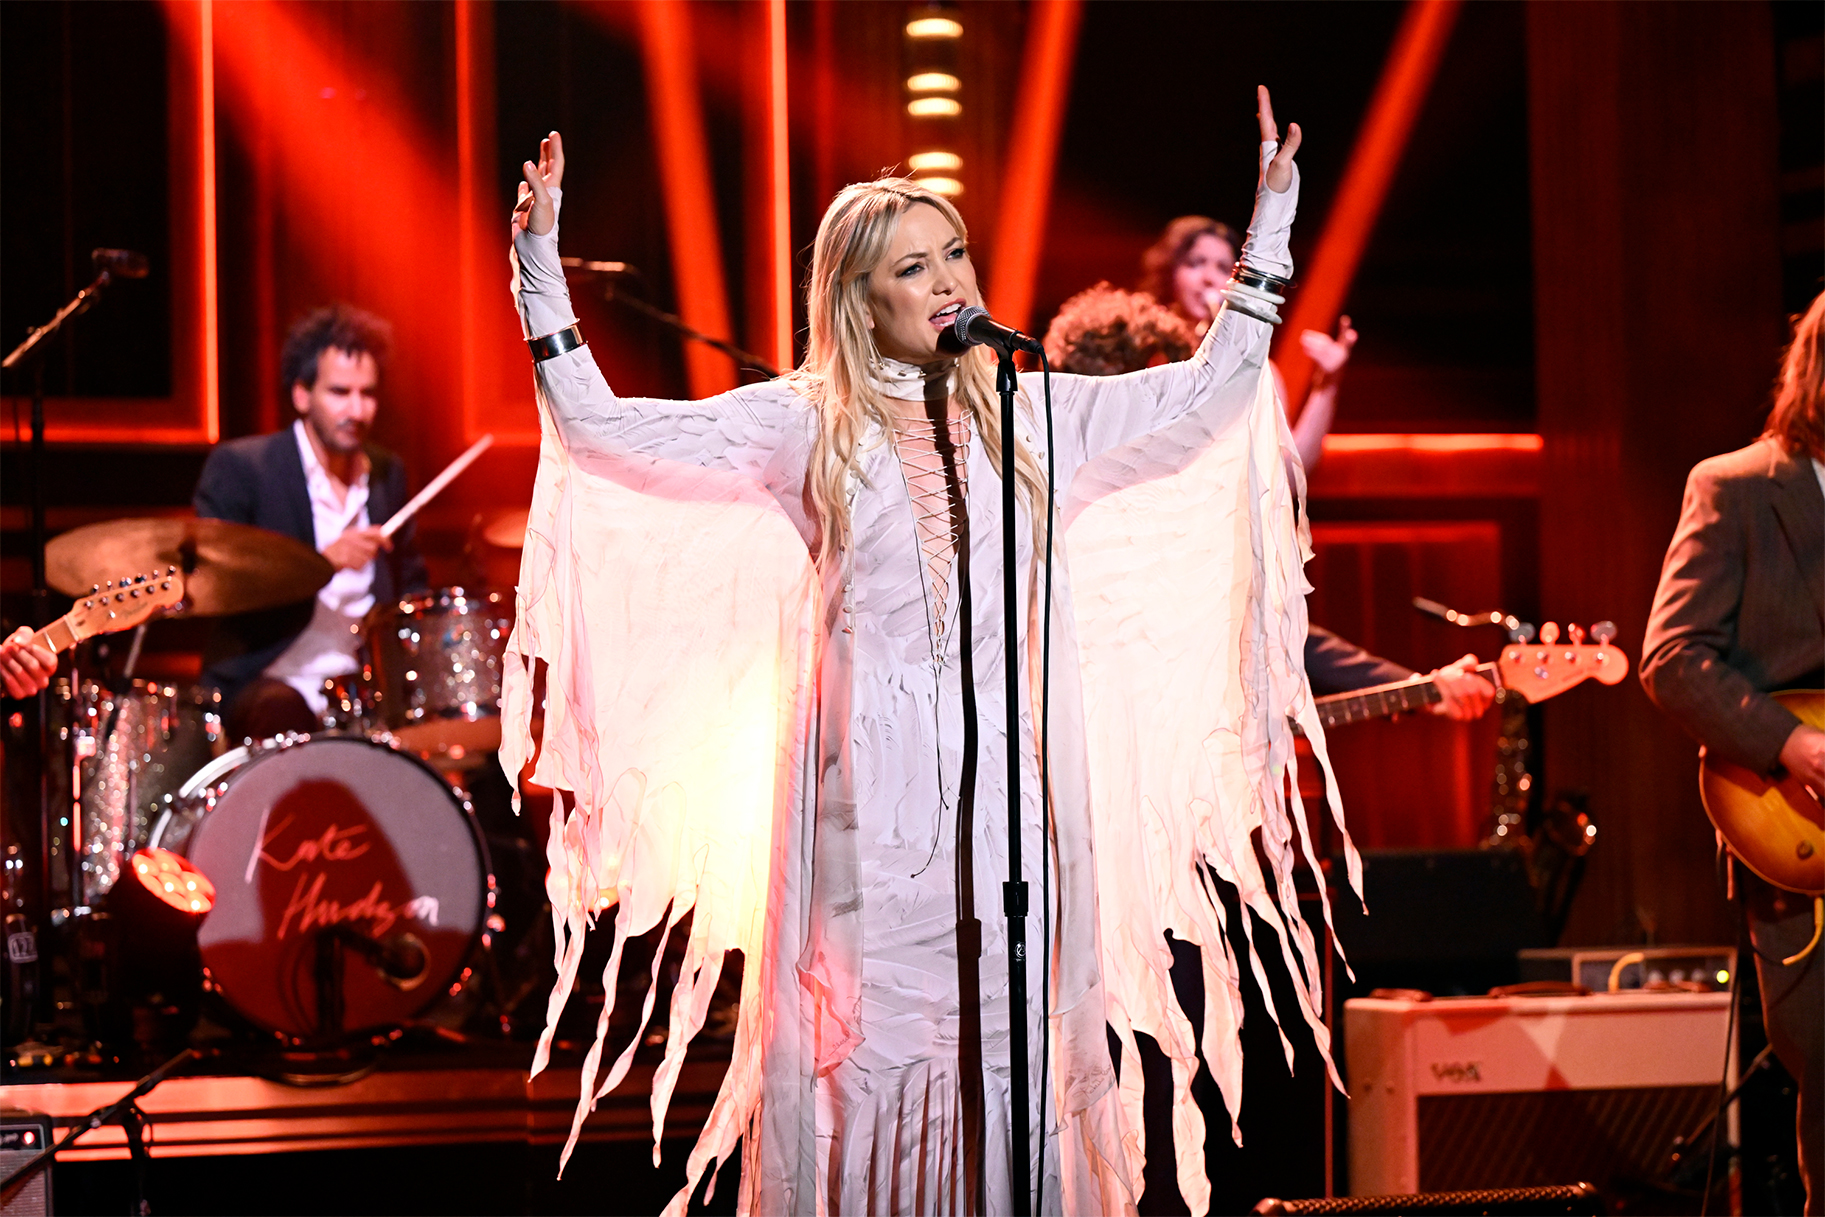 Kate Hudson's Singing Debut on the Tonight Show Is Beautiful